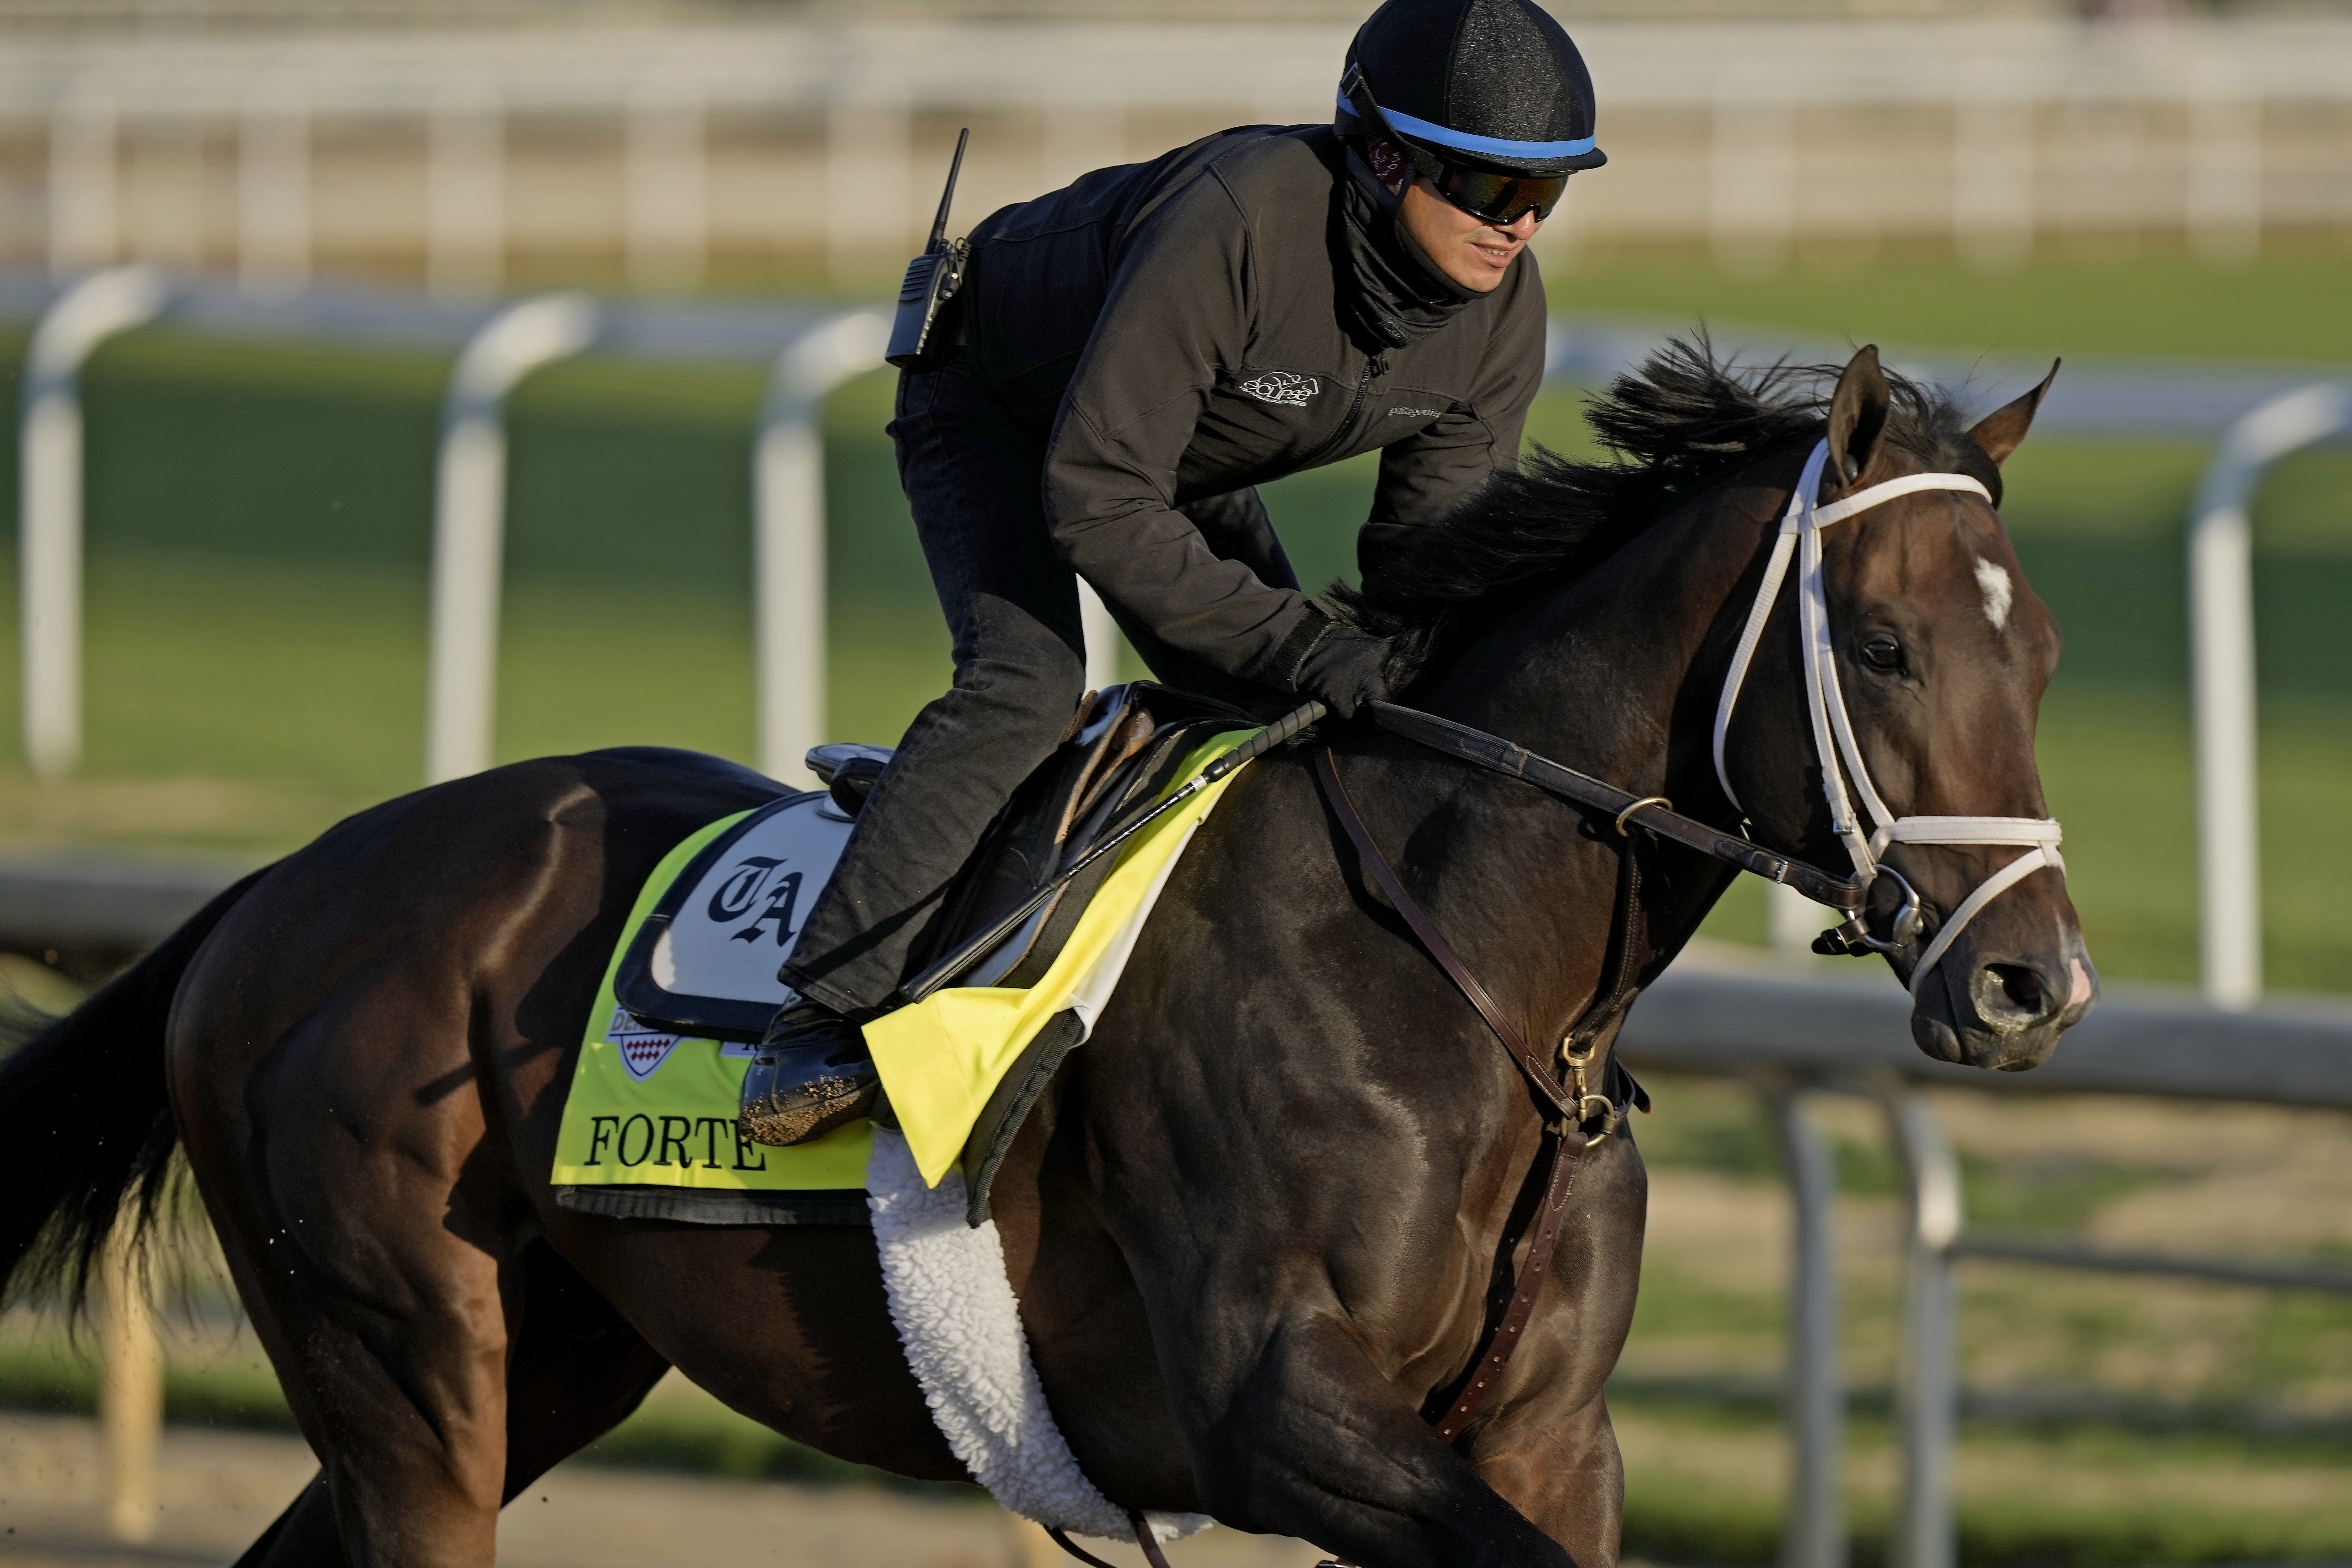 How to watch the Kentucky Derby What time is the main race? TV, live stream, more info